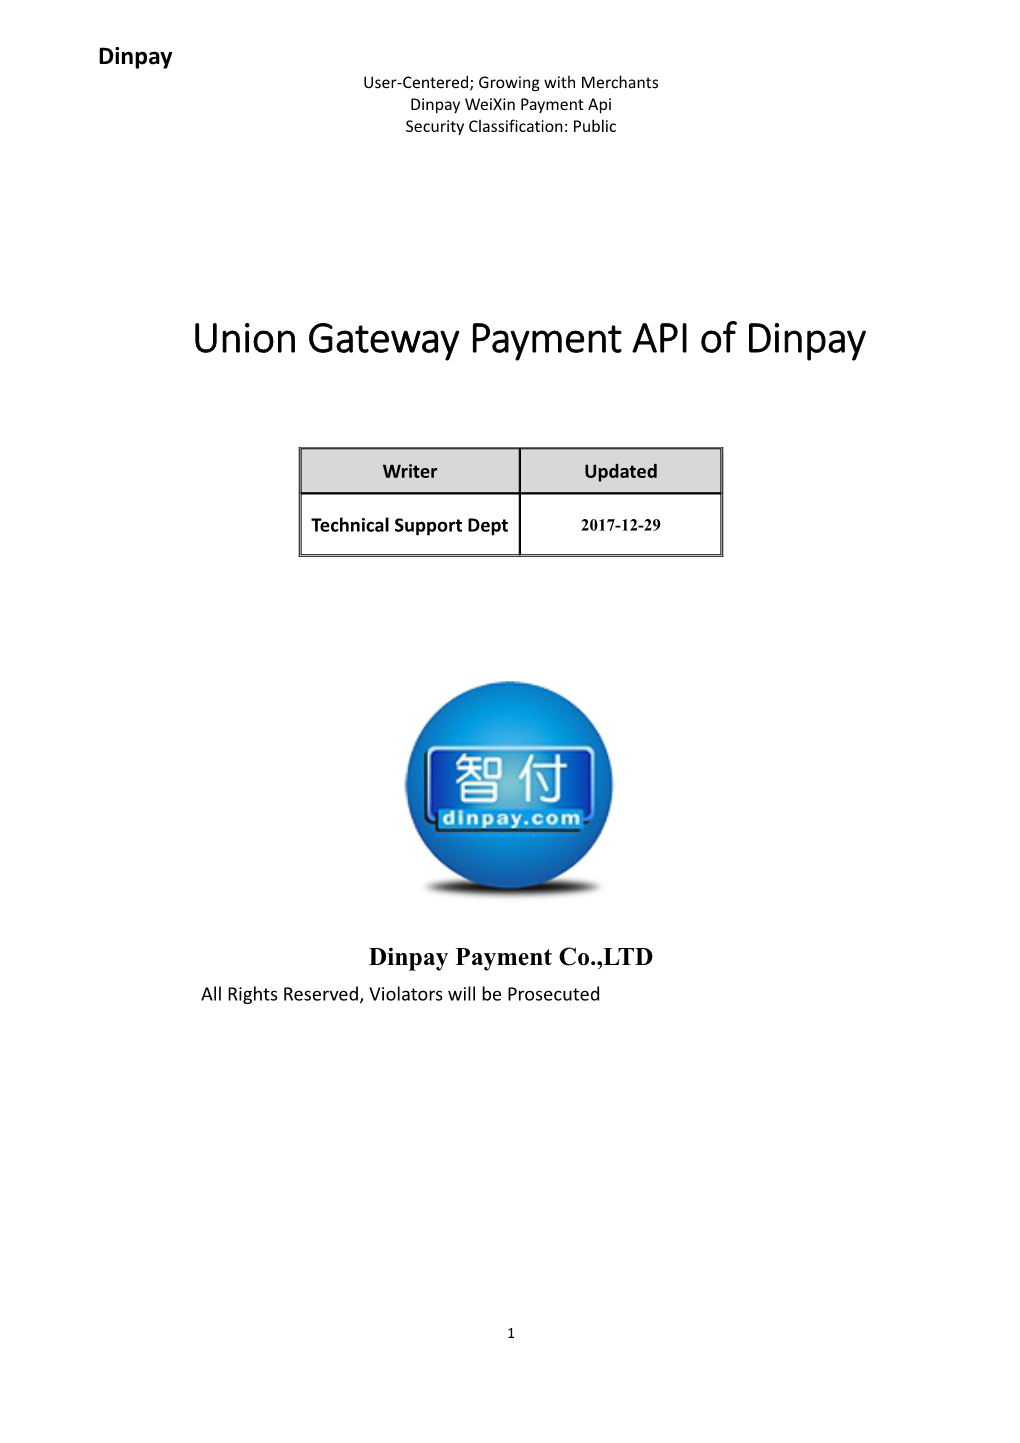 Union Gateway Payment API of Dinpay